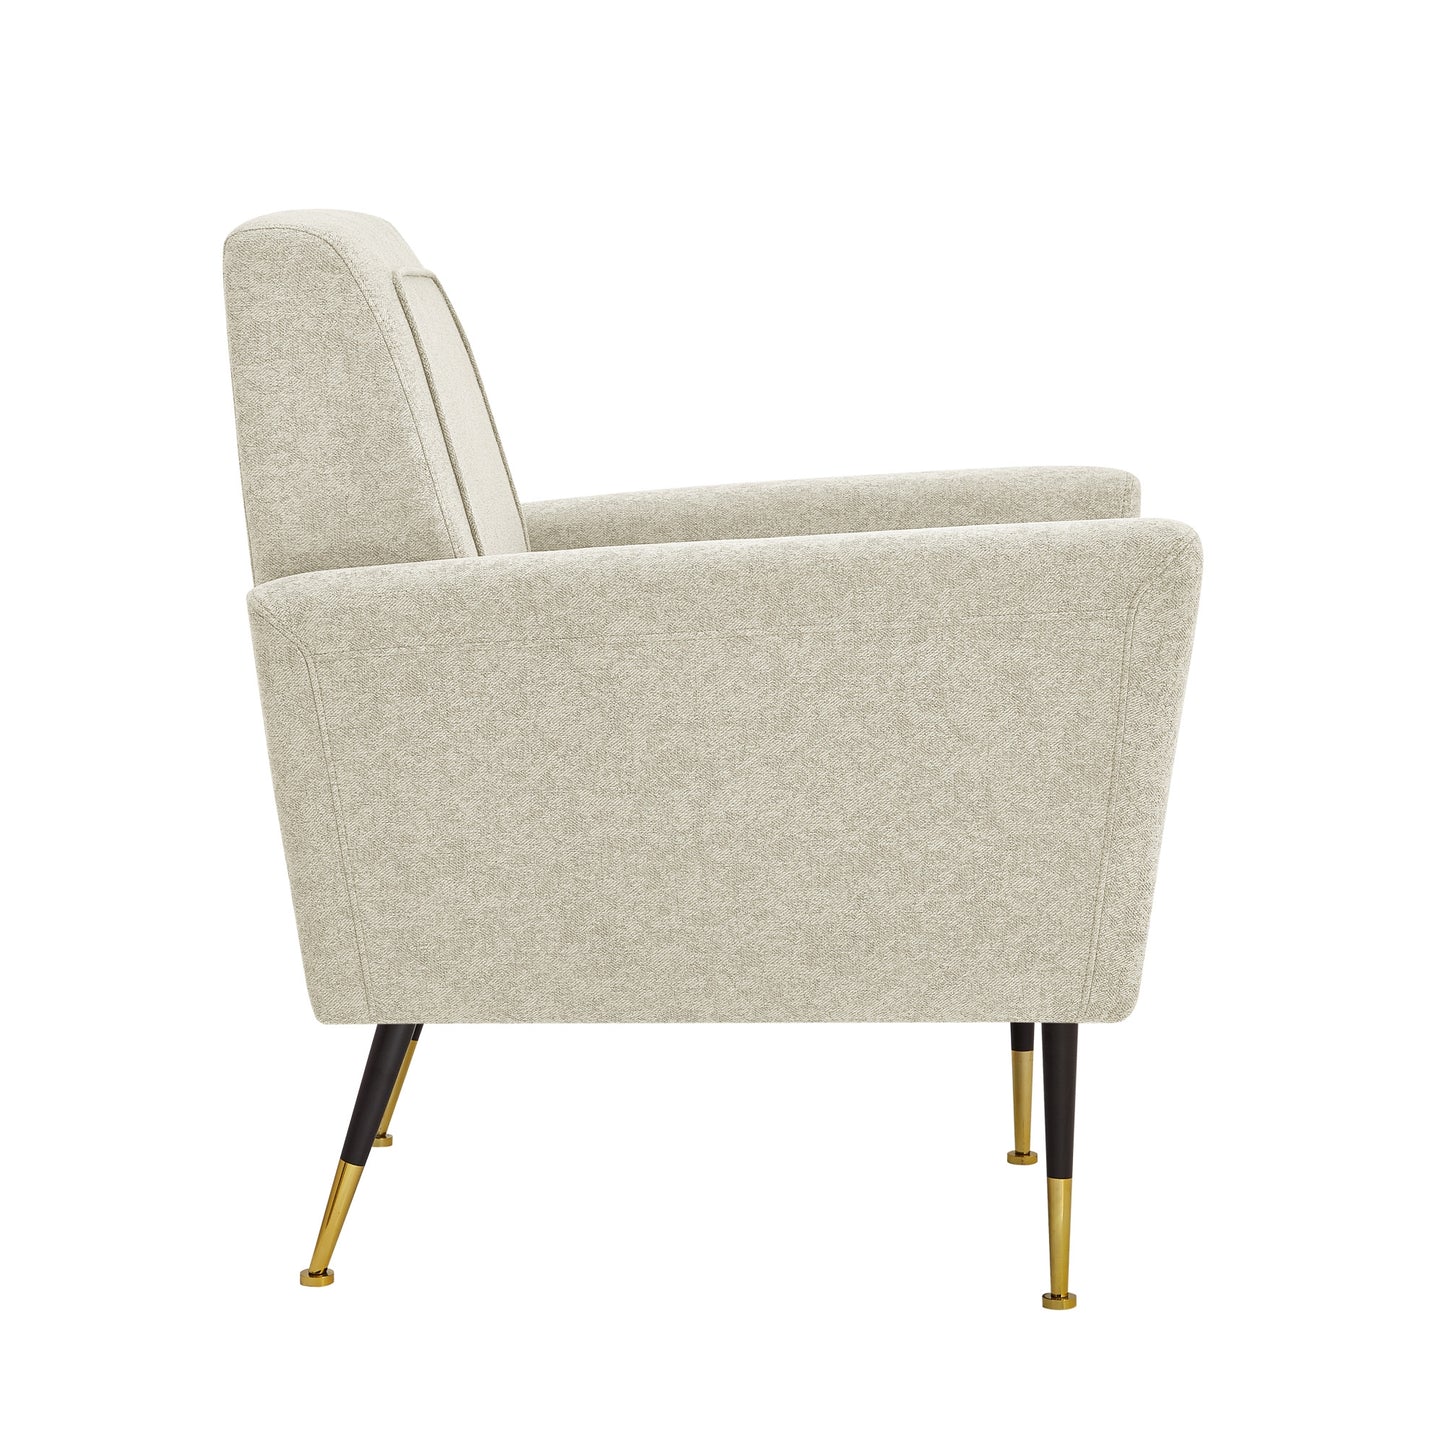 32" Beige And Gold Linen Arm Chair